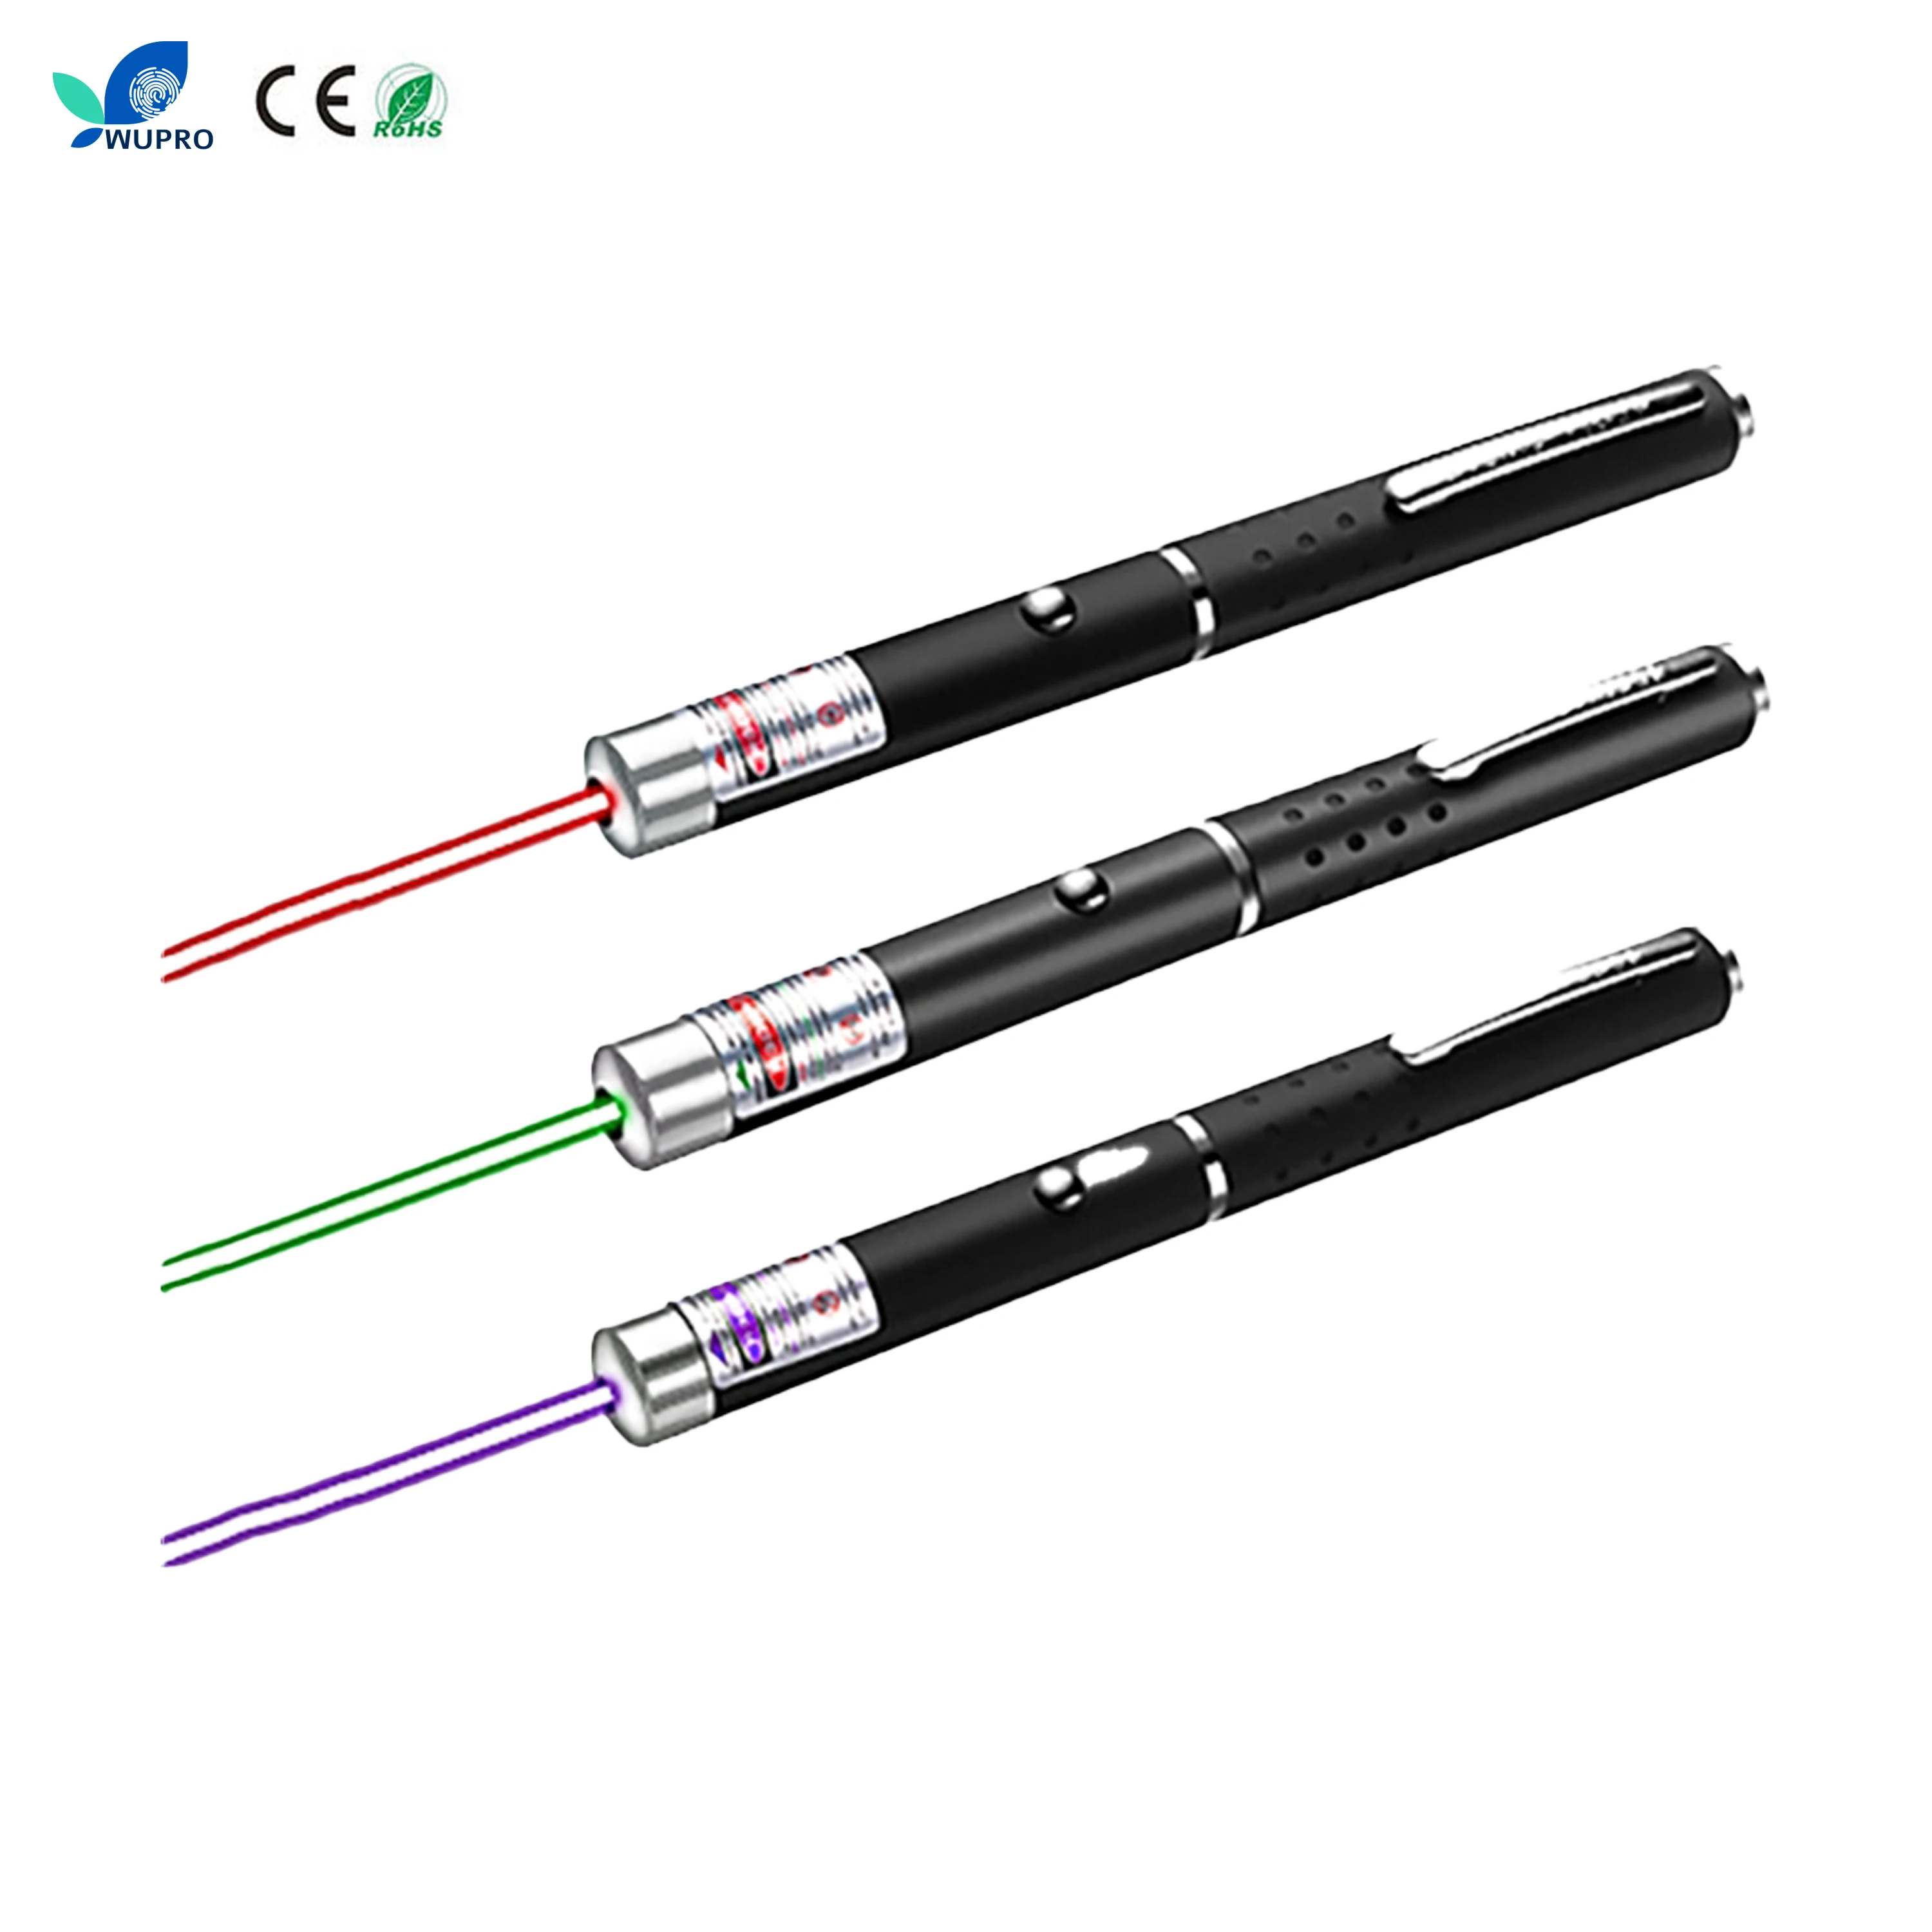 

Hot Sales Wupro 101 Powerful Laser Pointers Green Red Blue Light Lazer Pointer Cat Pet Play Laser Pen Pointer